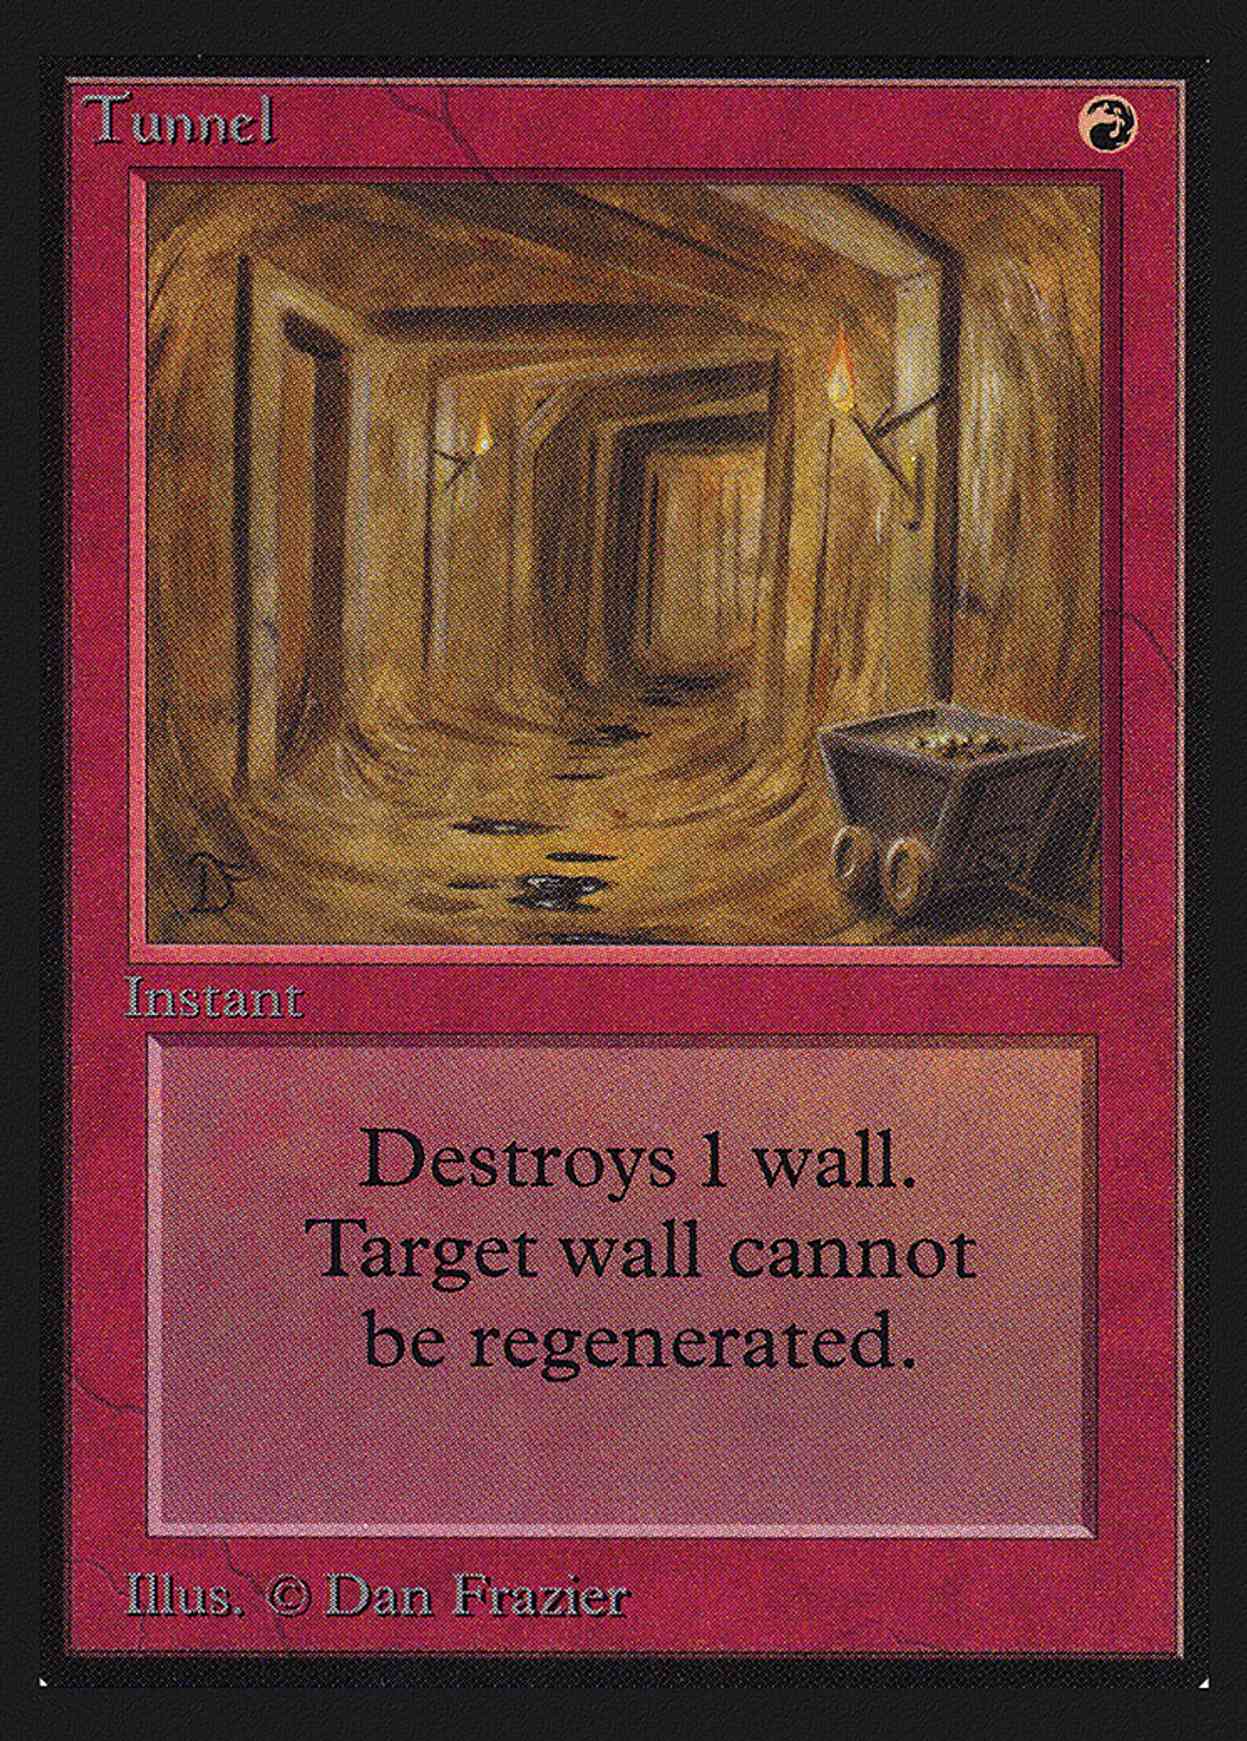 Tunnel (IE) magic card front